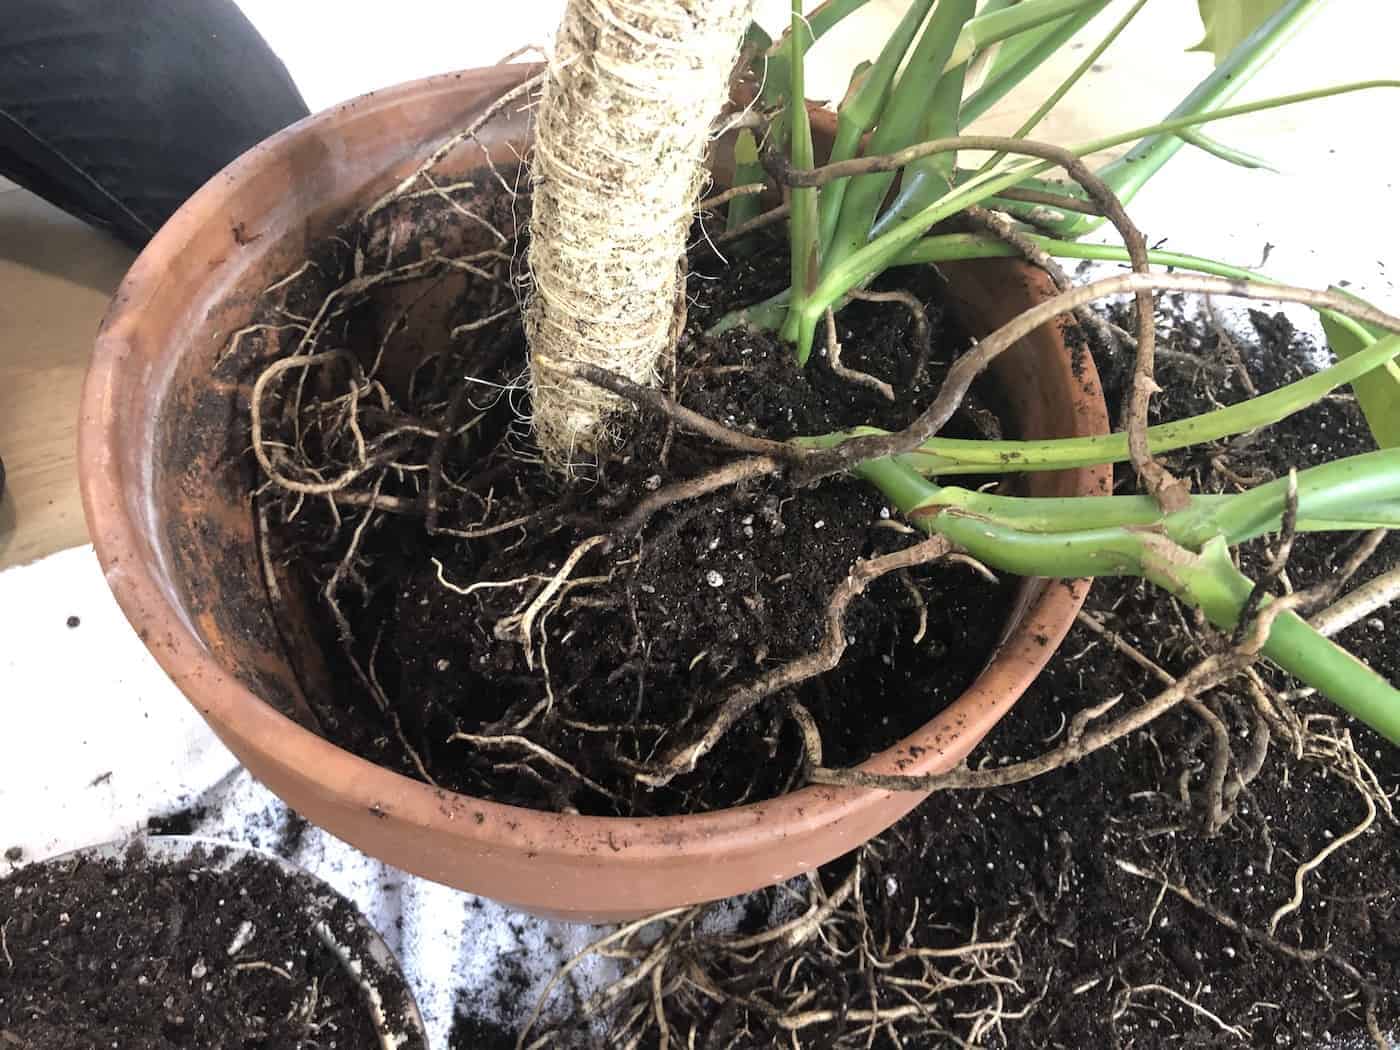 Repotting the monstera plant around the moss pole base in the planter